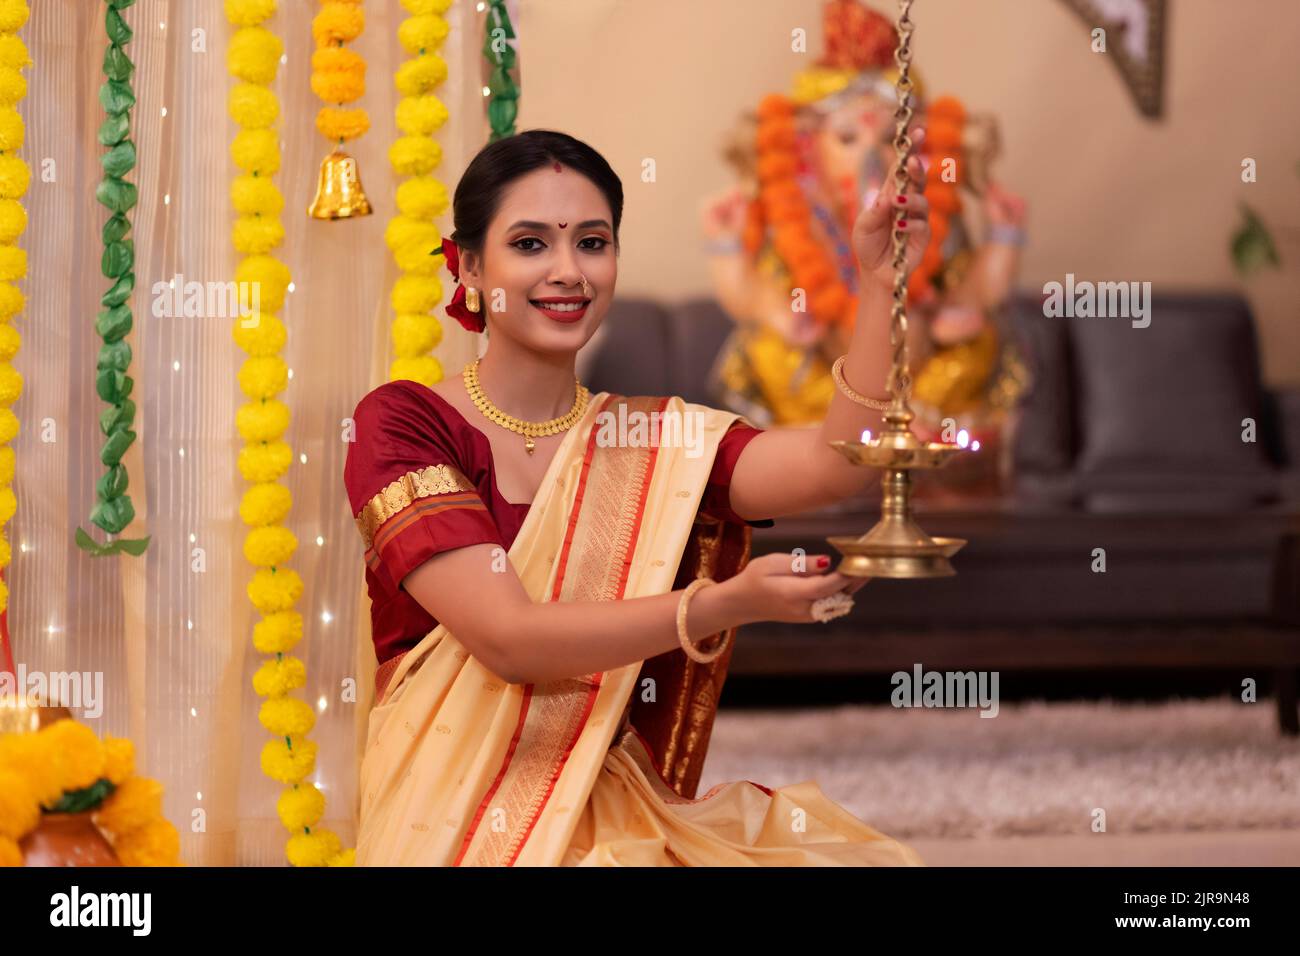 Portrait of Maharashtrian woman in traditional dress holding oil lamp on the occasion of Ganesh Chaturthi Stock Photo